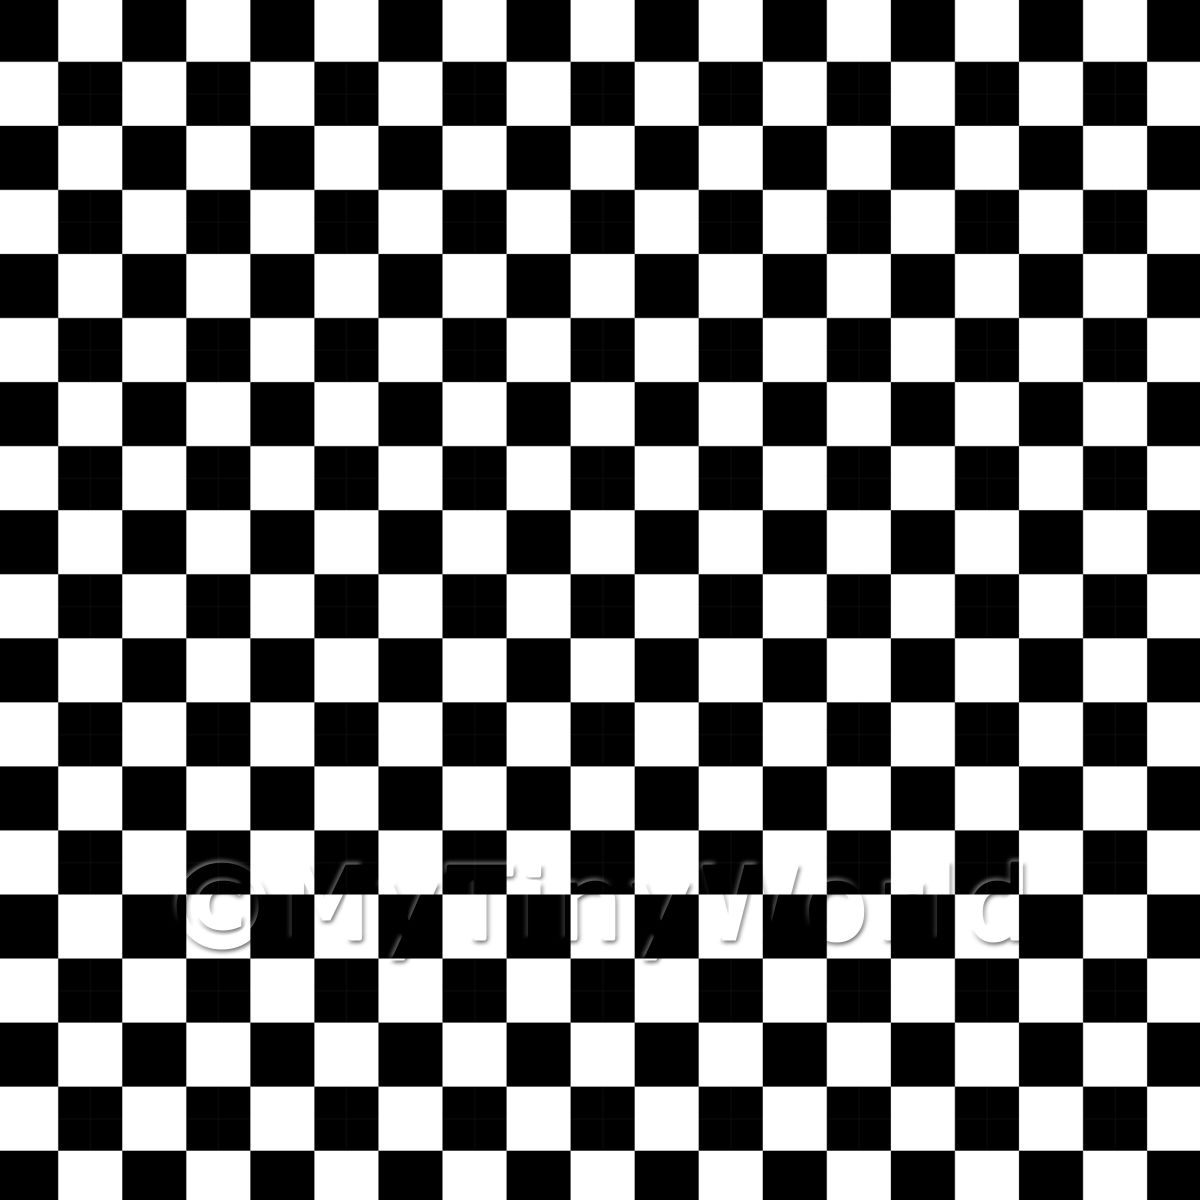 1:48th Classic Black And White Checkerboard Design Tile Sheet 